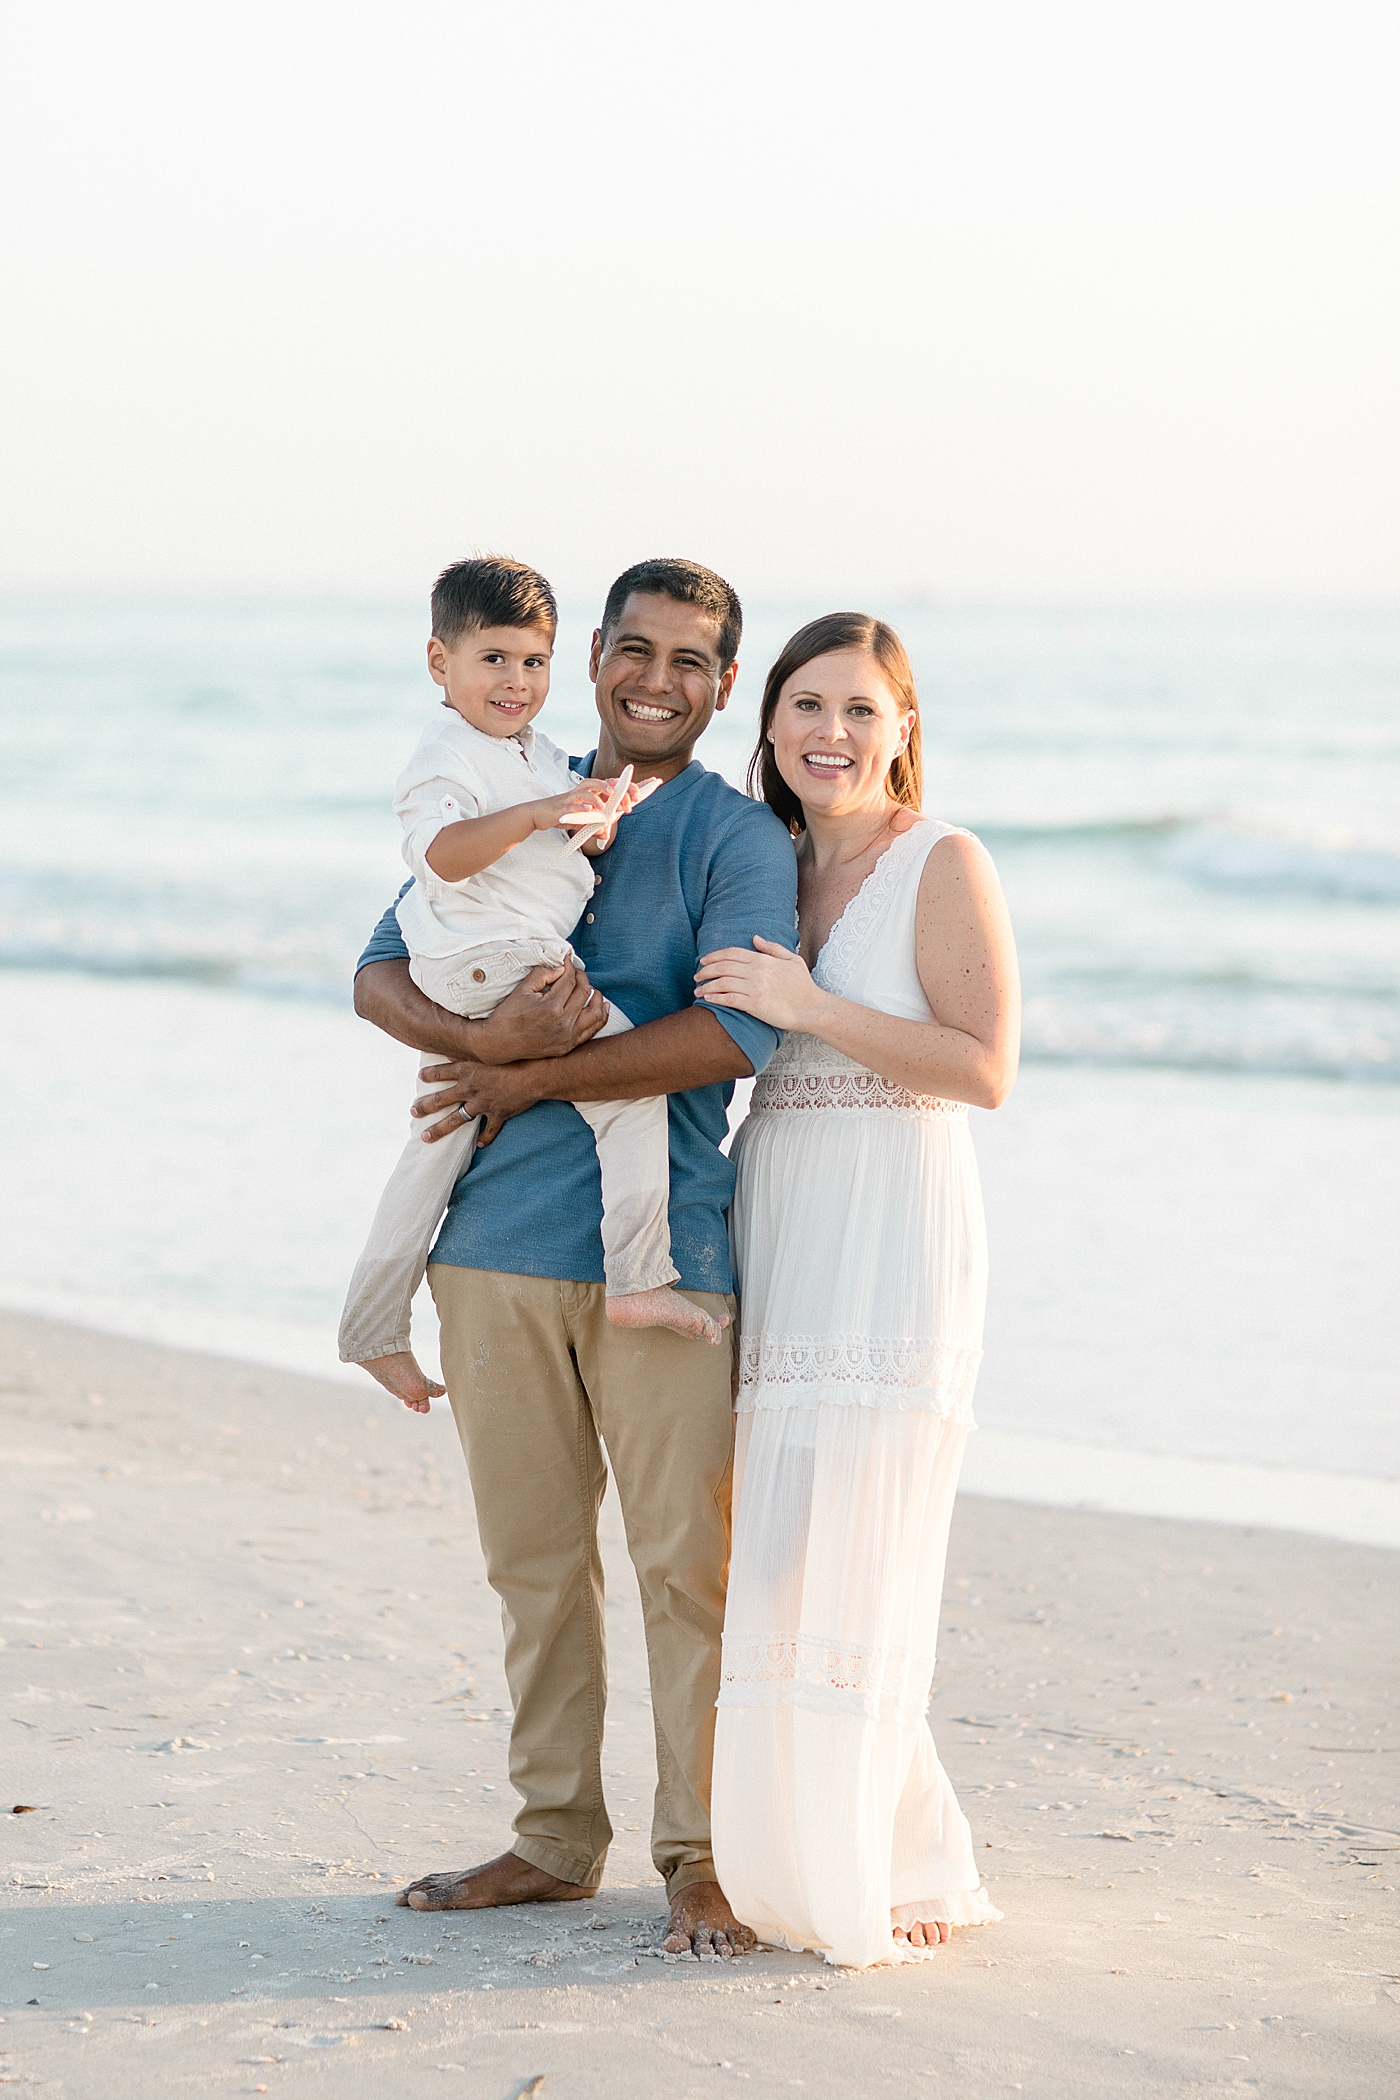 Family session on the beach in Tampa in January. Photos by Brittany Elise Photography.